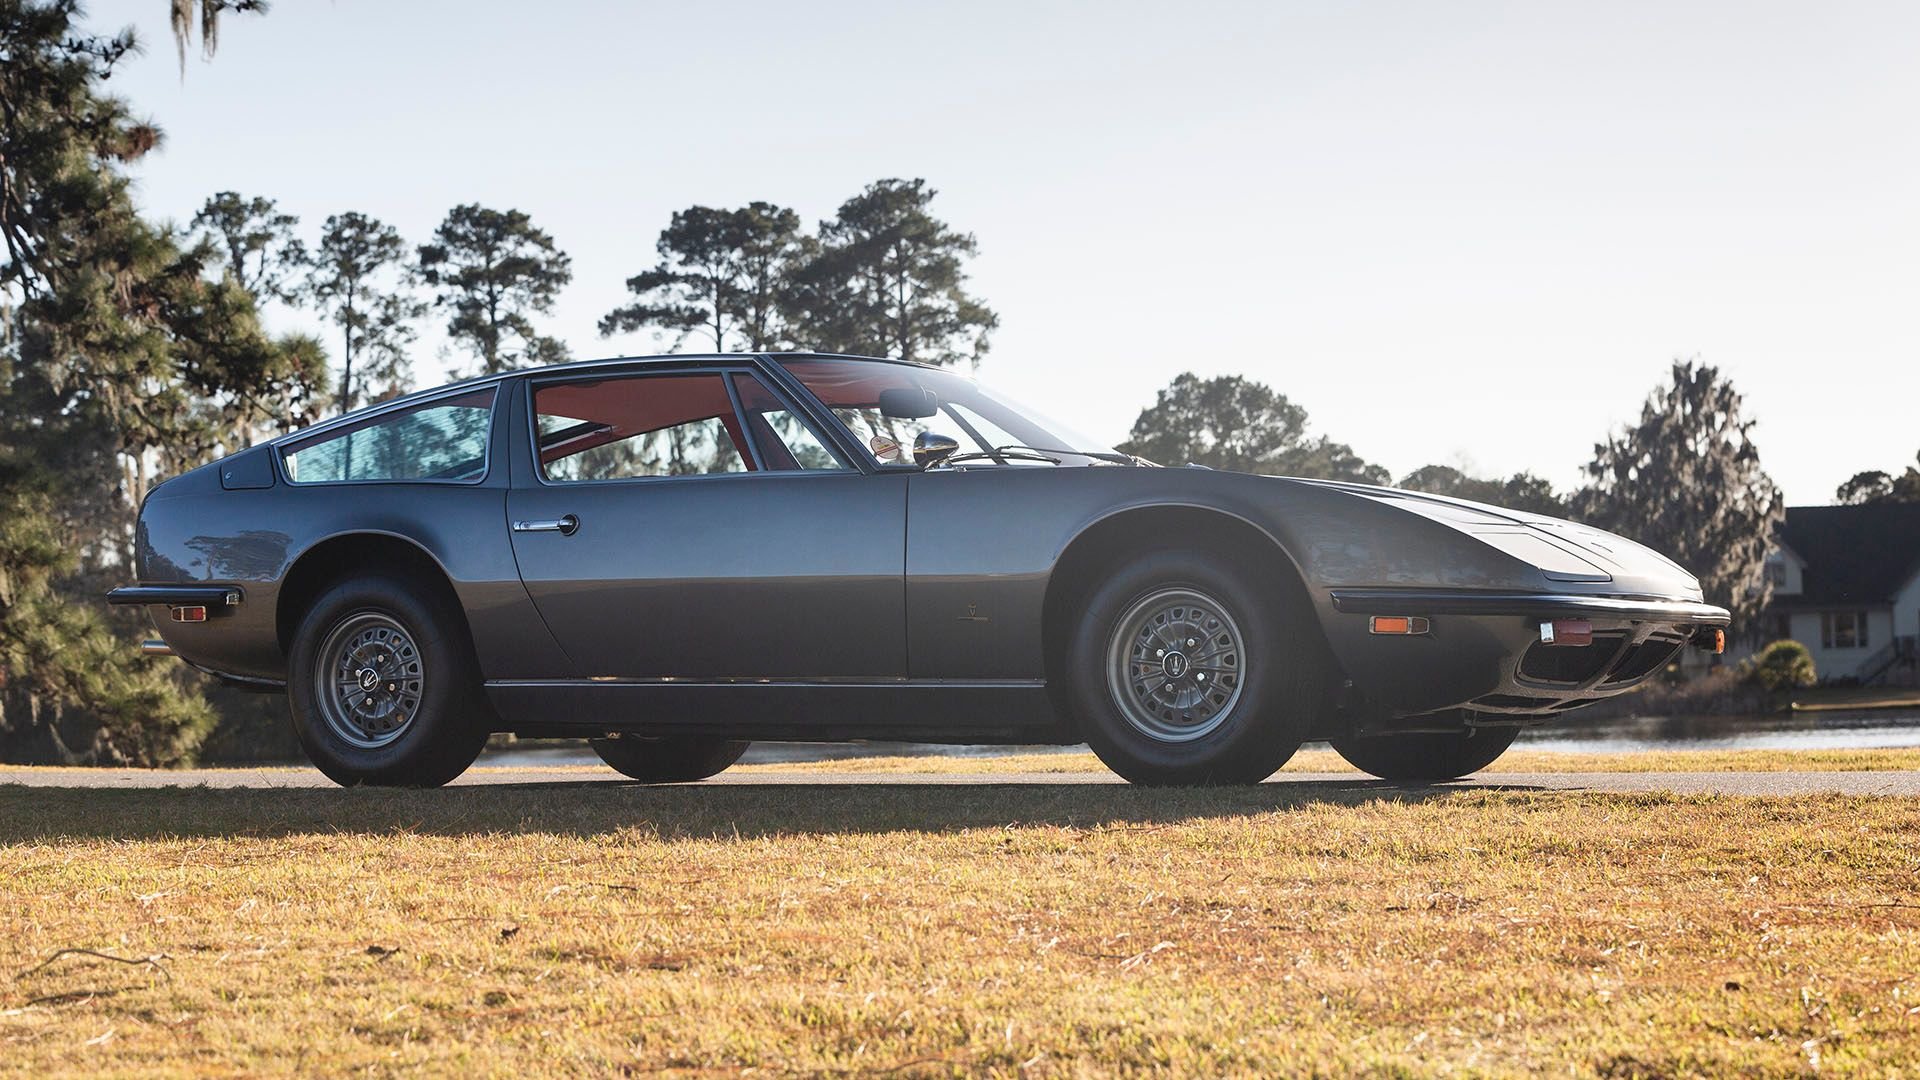 For Sale 1971 Maserati Indy 4900